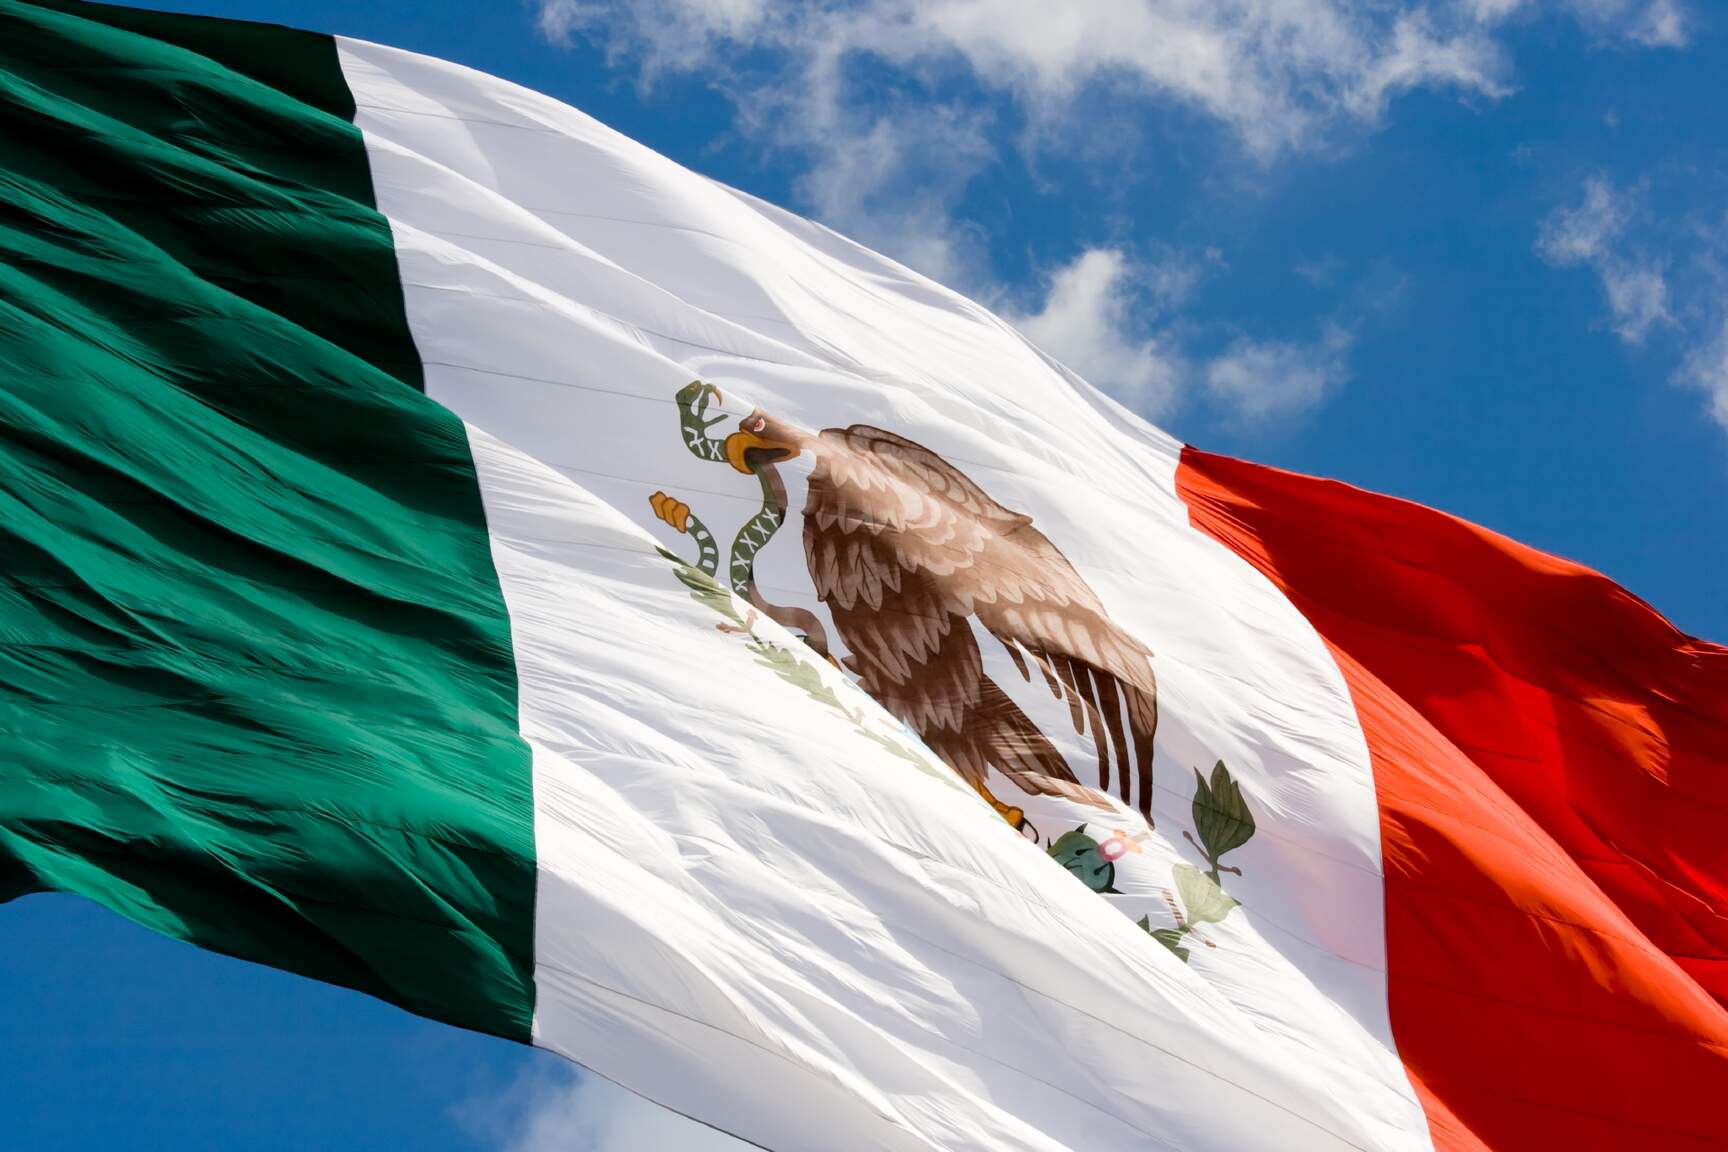 DACHSER is serving customers in Mexico for over 15 years